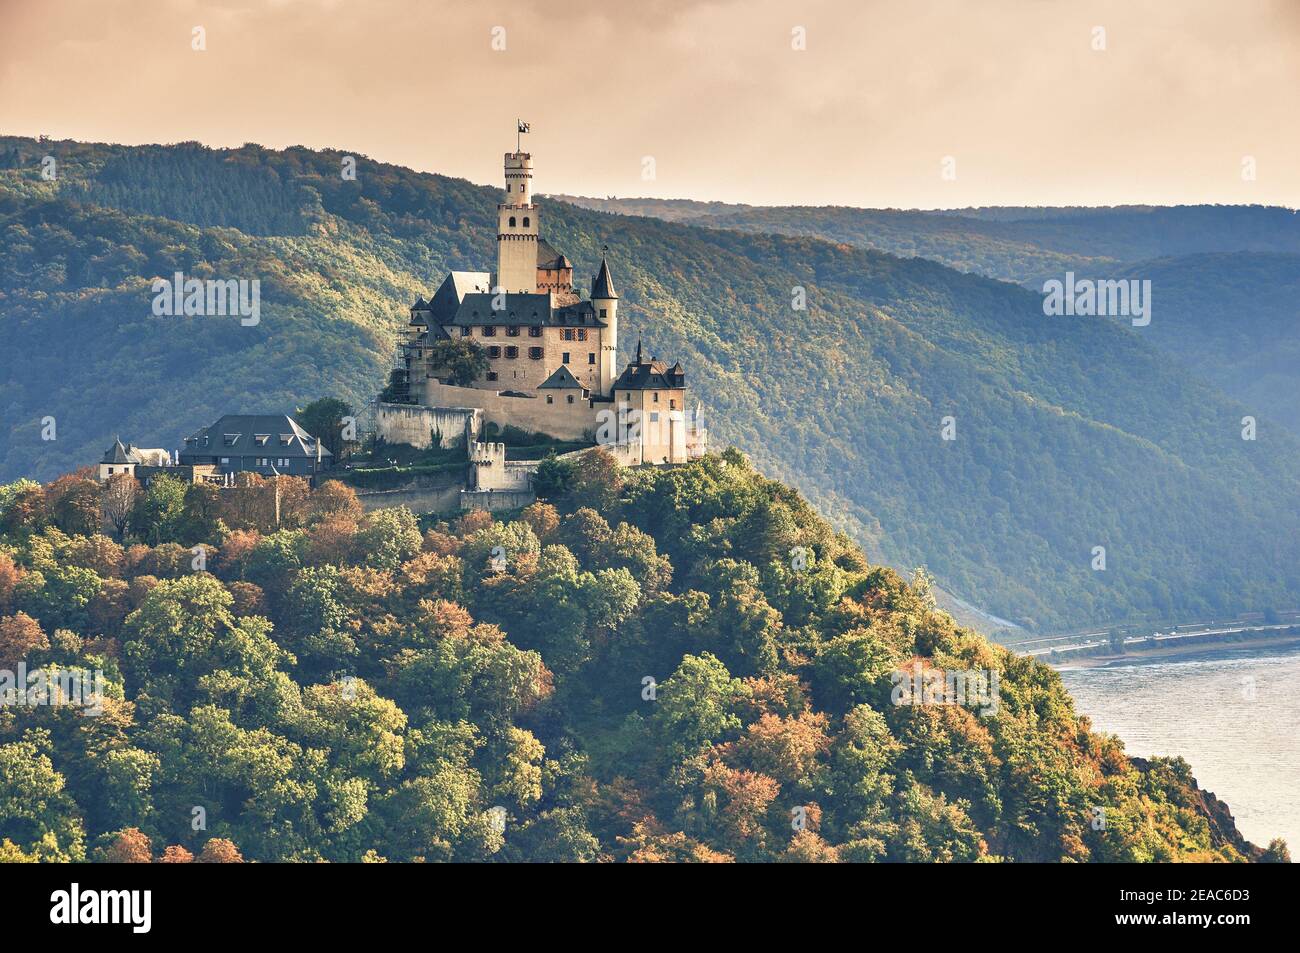 Germany, Marksburg, Braubach, slate cone, middle ages, toll castle, Hague convention, hill castle, Stock Photo